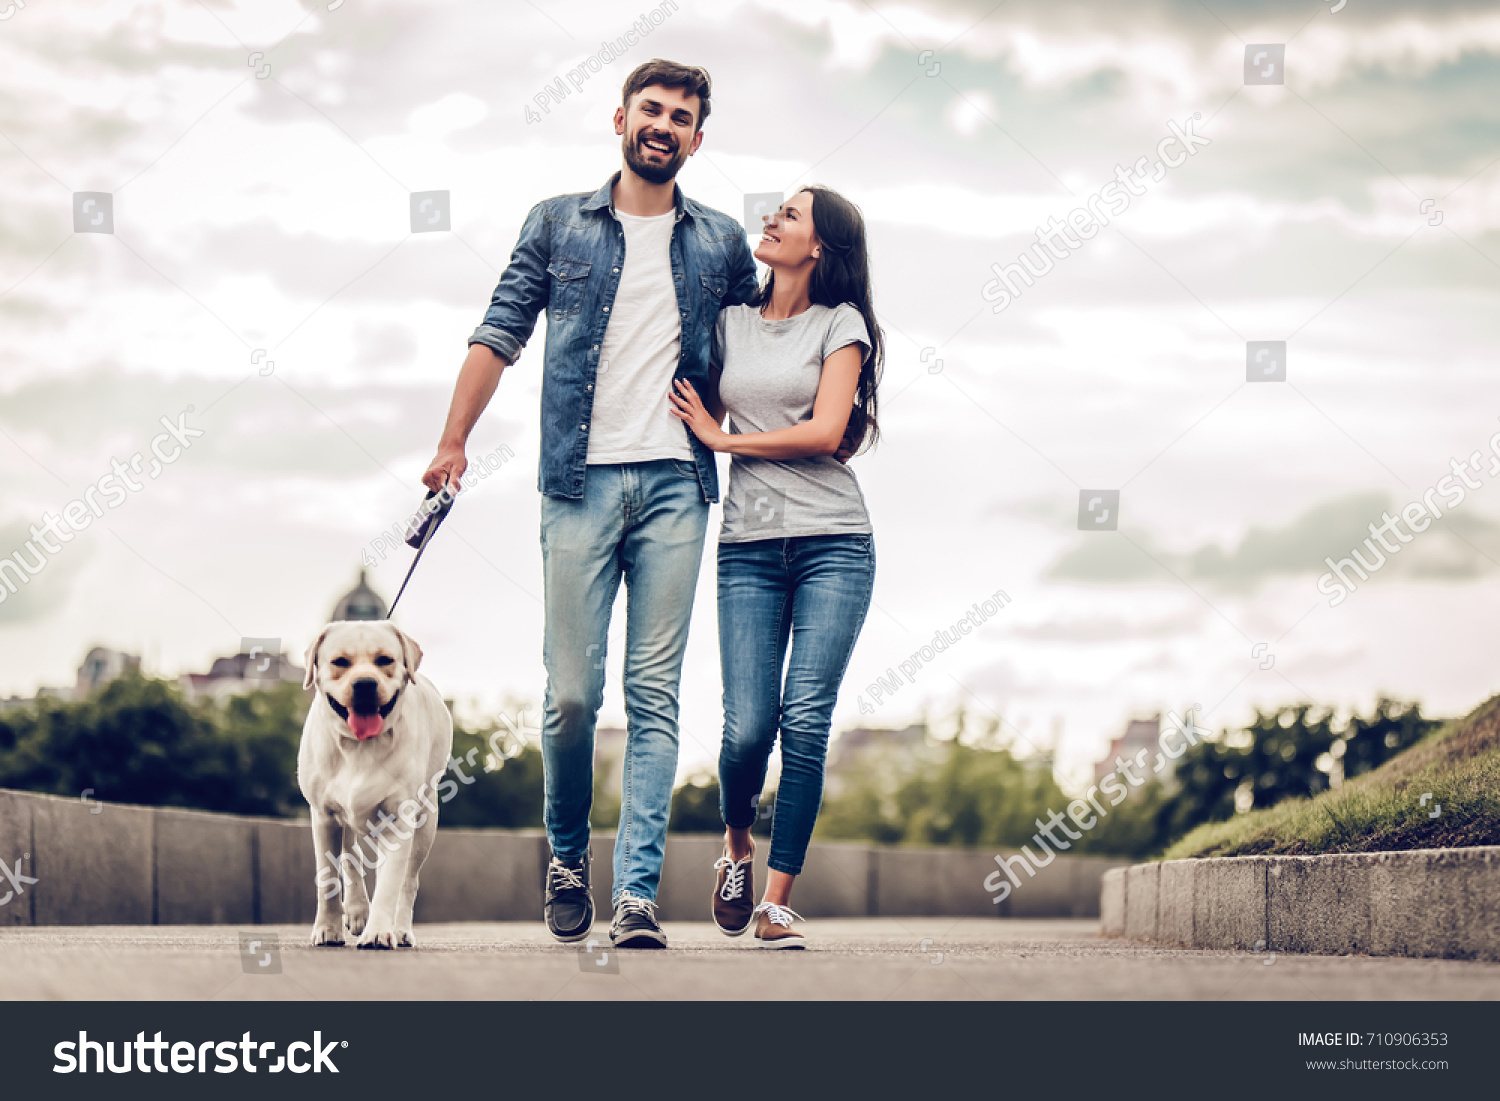 Romantic couple is on a walk in the city with their dog labrador. Beautiful young woman and handsome man are having fun outdoors with golden retriever labrador. #710906353